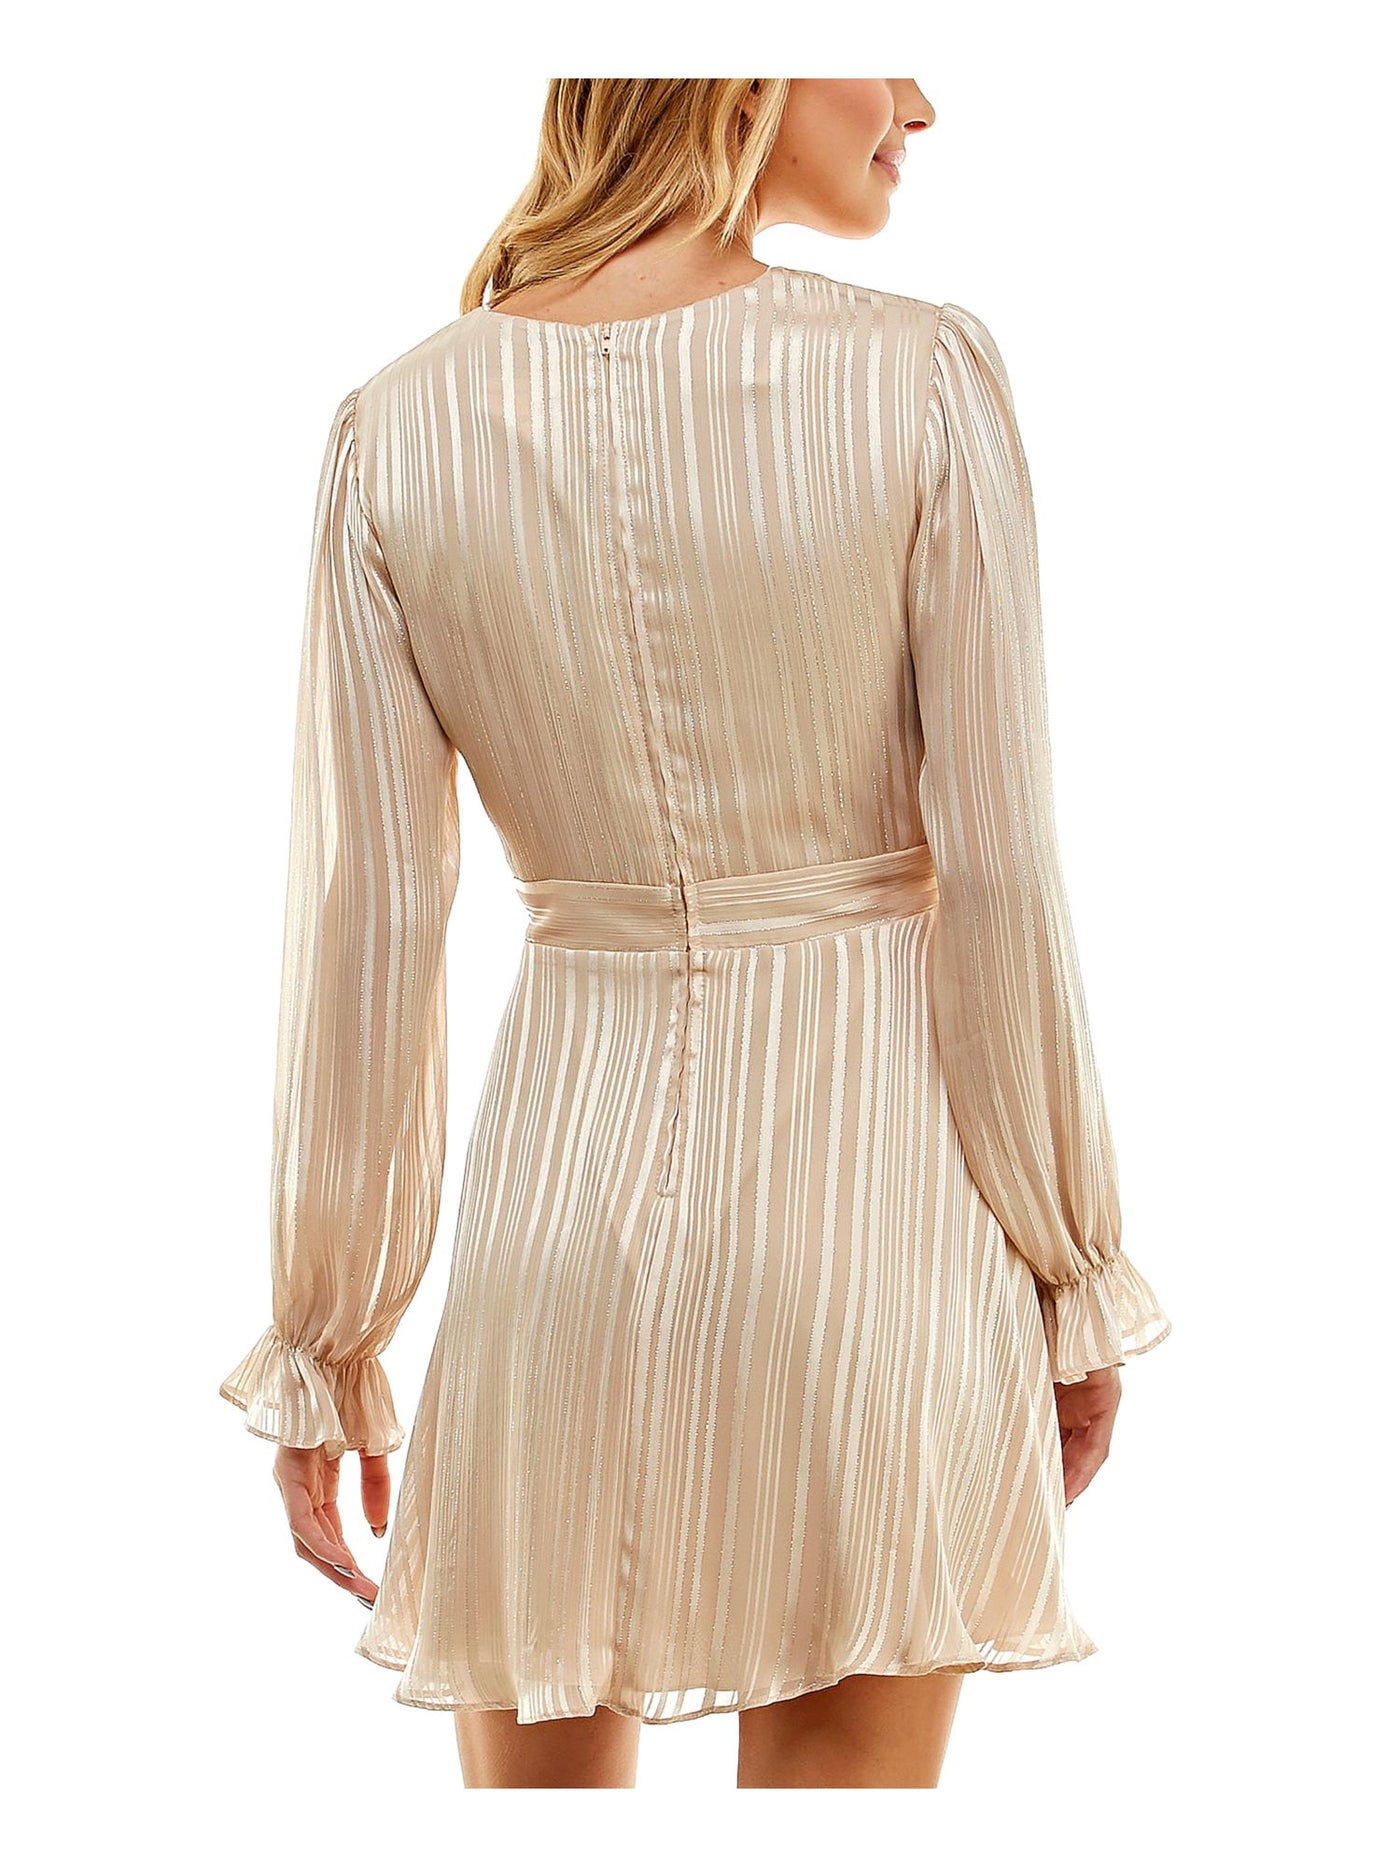 B DARLIN Womens Beige Zippered Lined Striped Long Sleeve Surplice Neckline Above The Knee Party Fit + Flare Dress Juniors 1\2